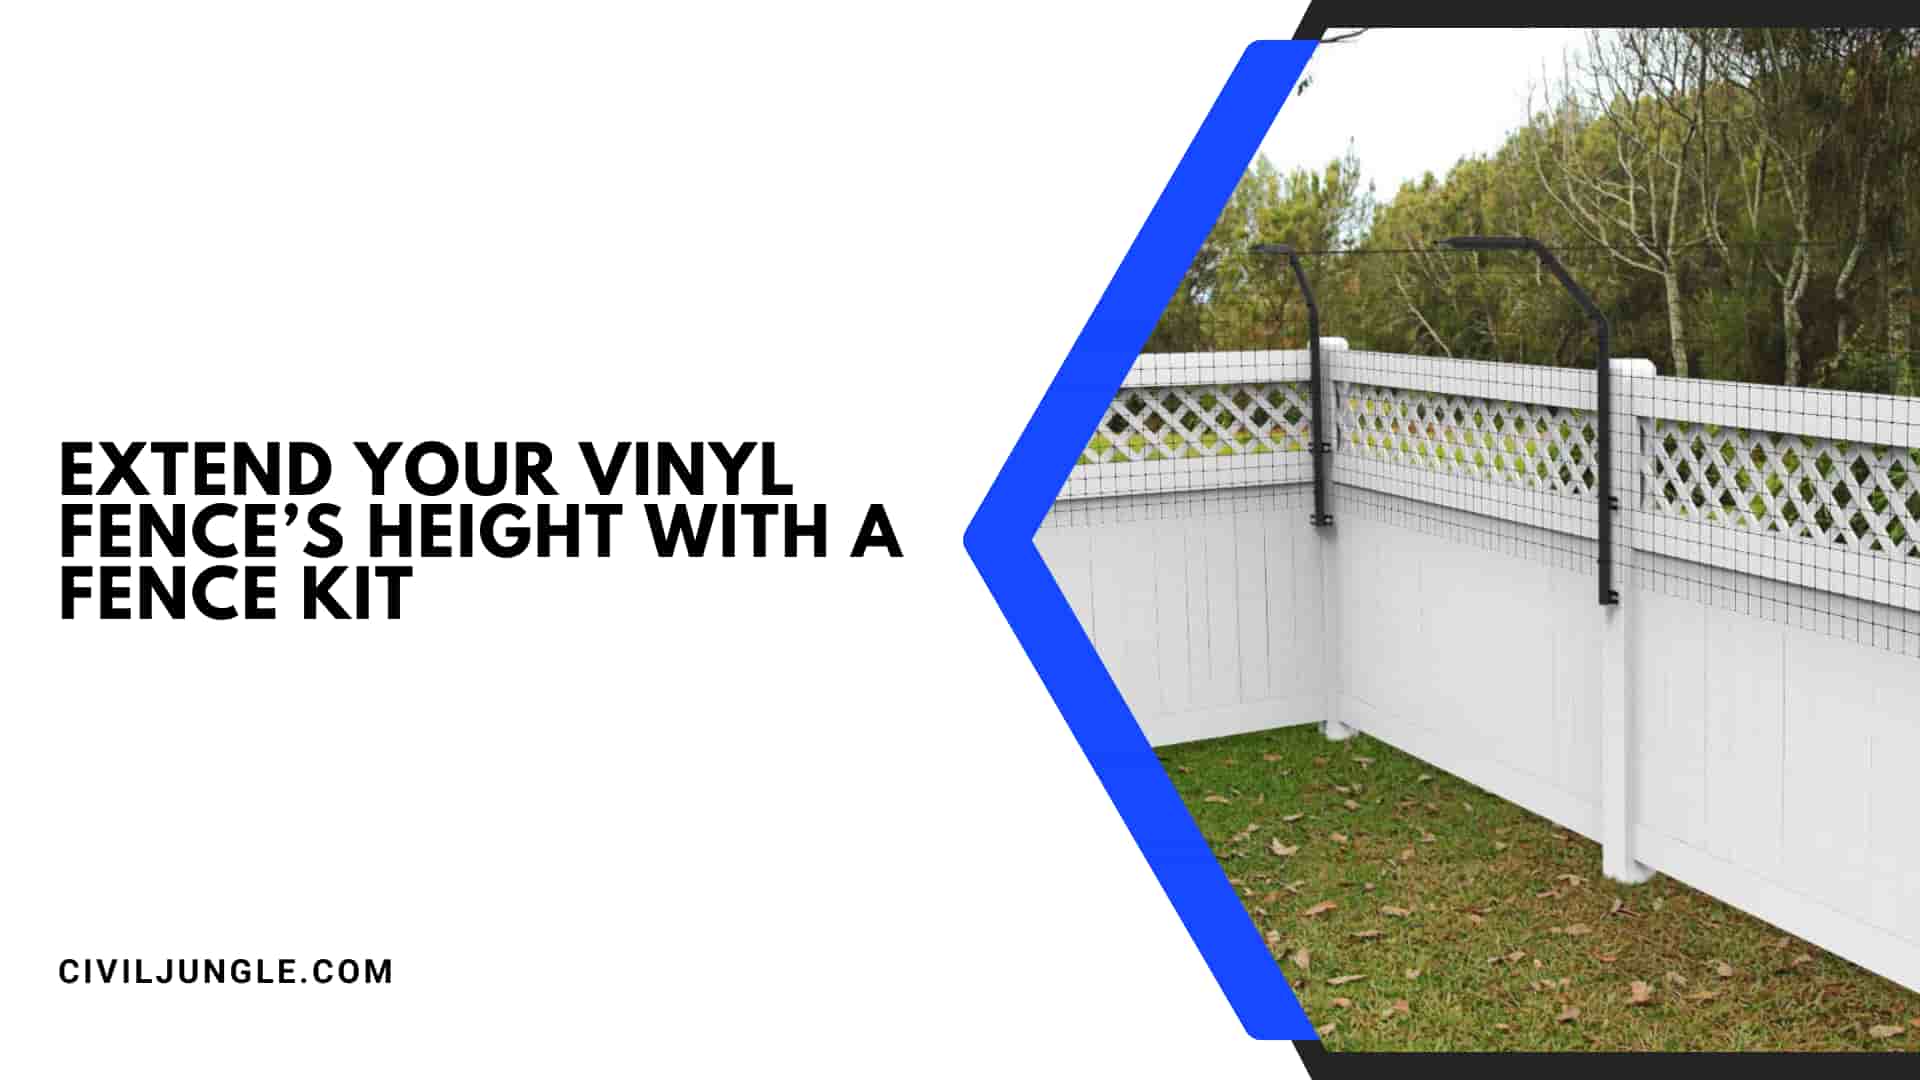 Extend Your Vinyl Fence’s Height with a Fence Kit